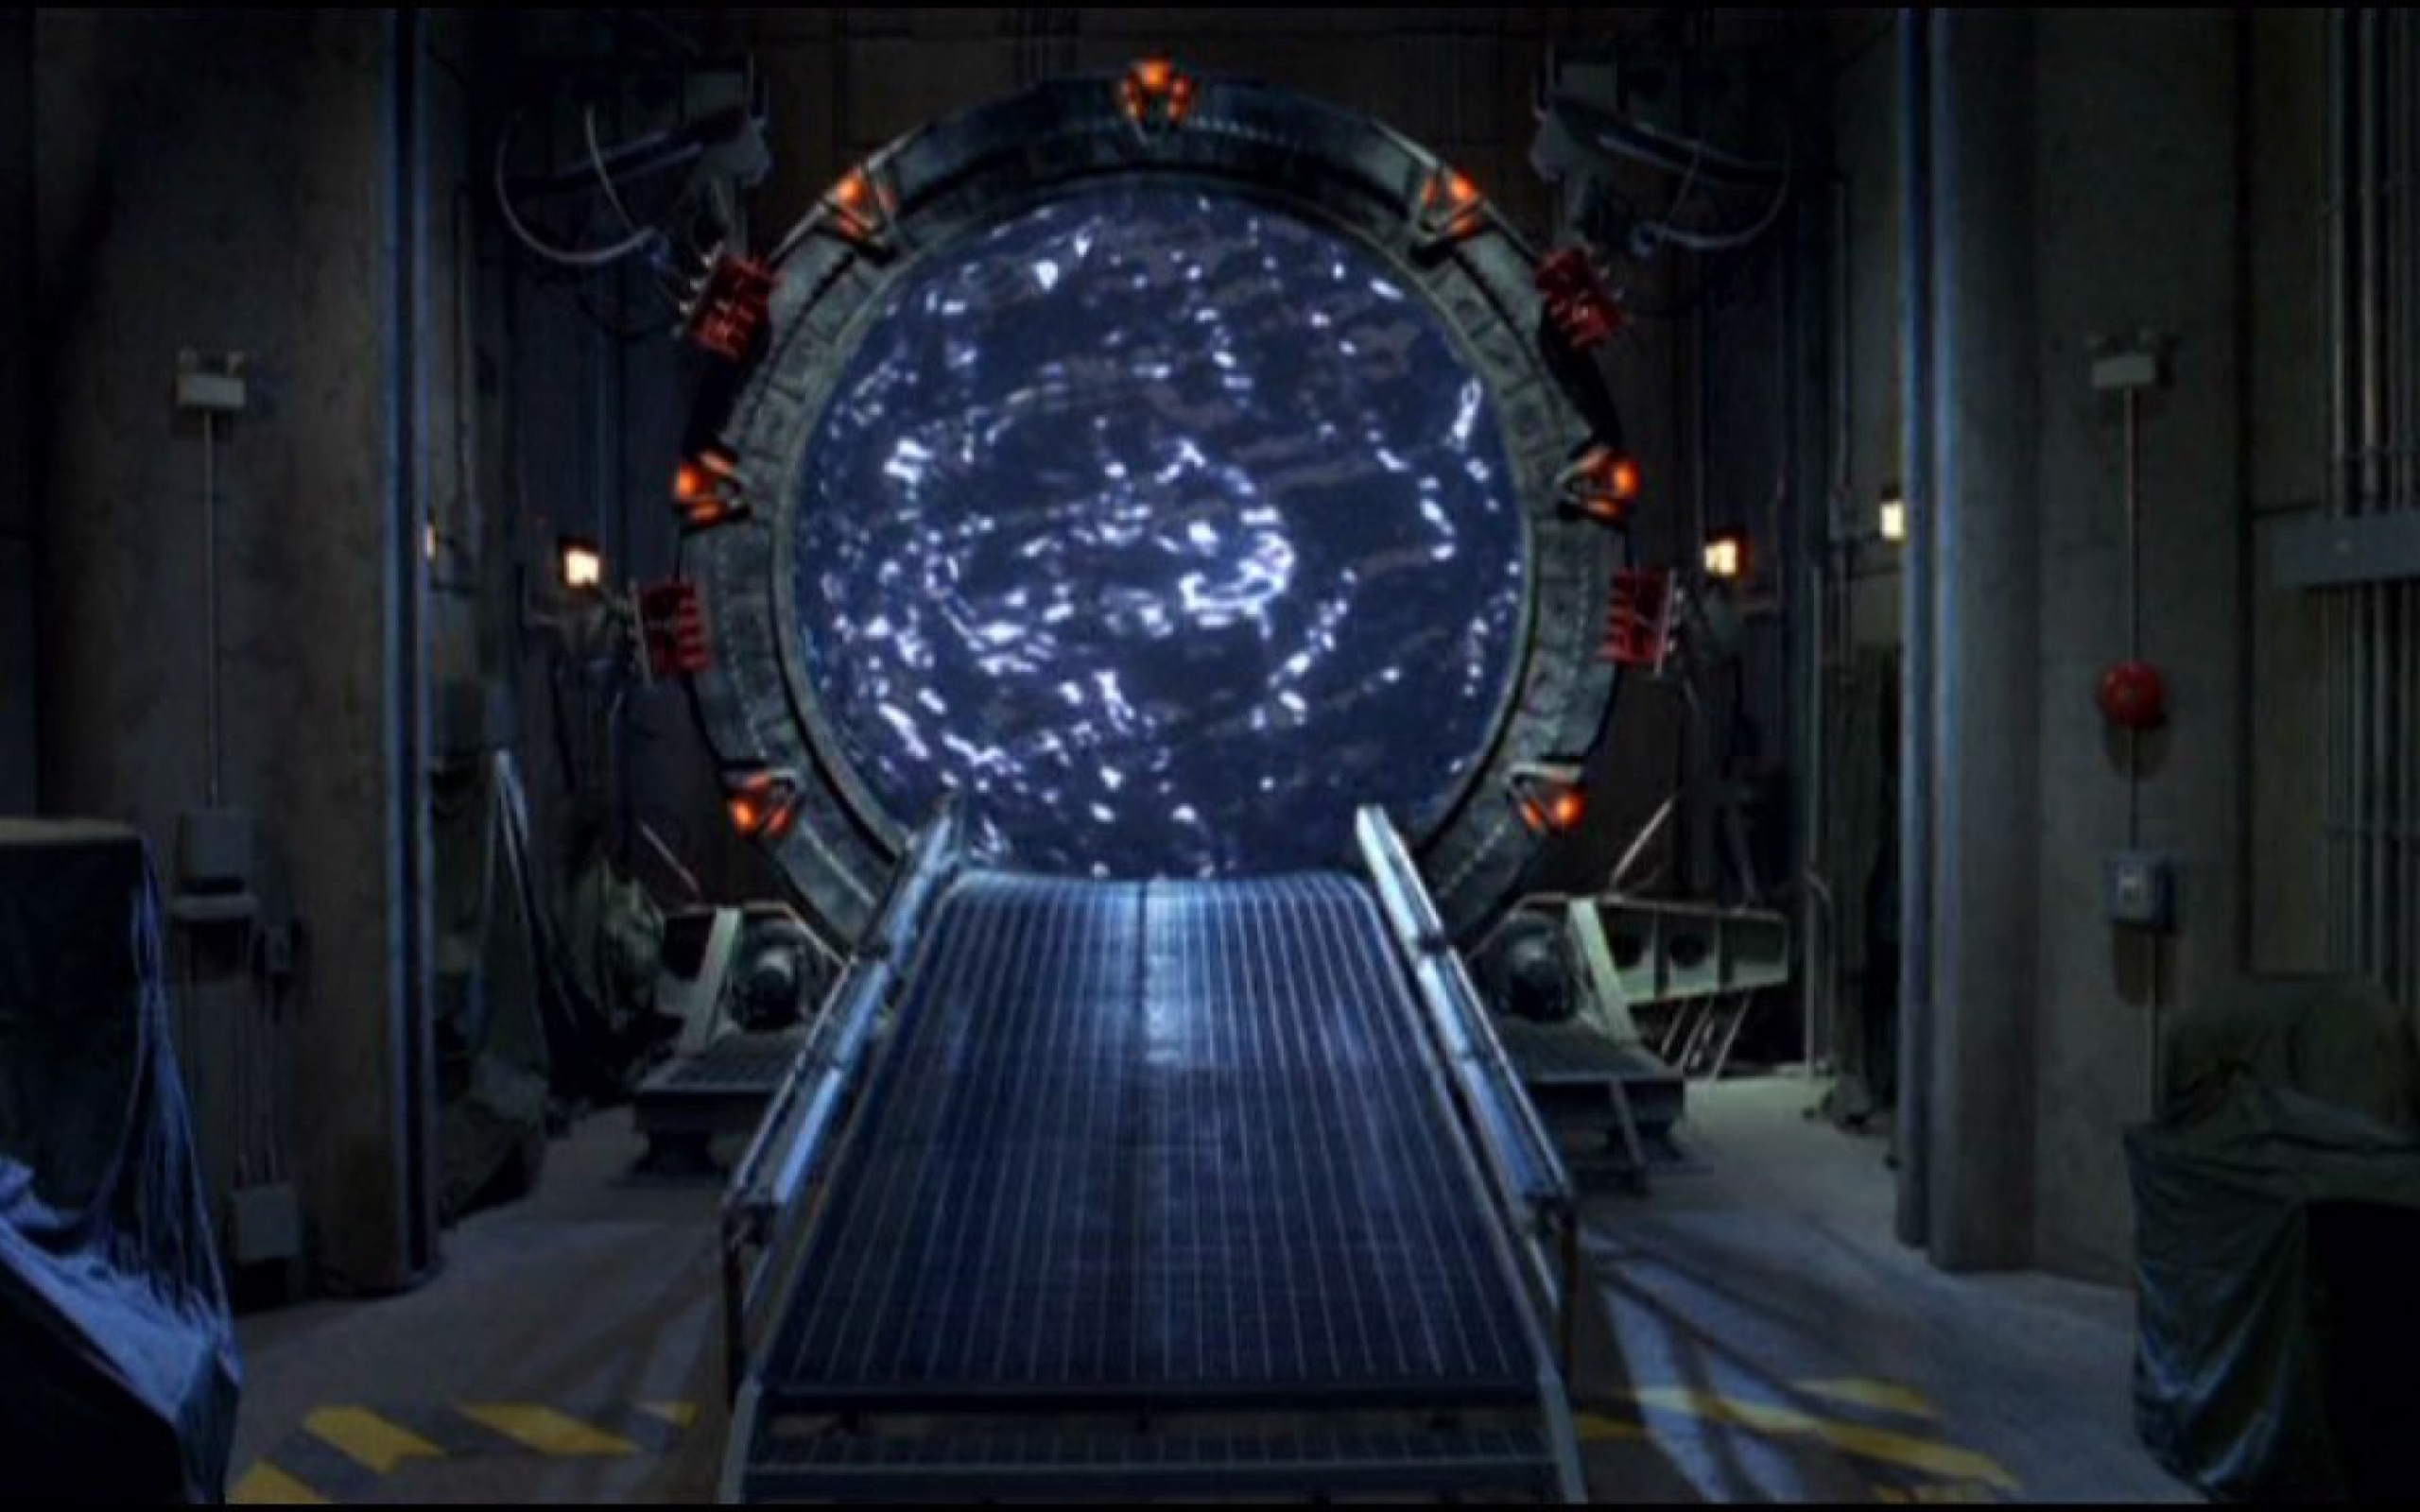 Stargate Movie, HQ wallpapers, 4K pictures, Movie collection, 2560x1600 HD Desktop